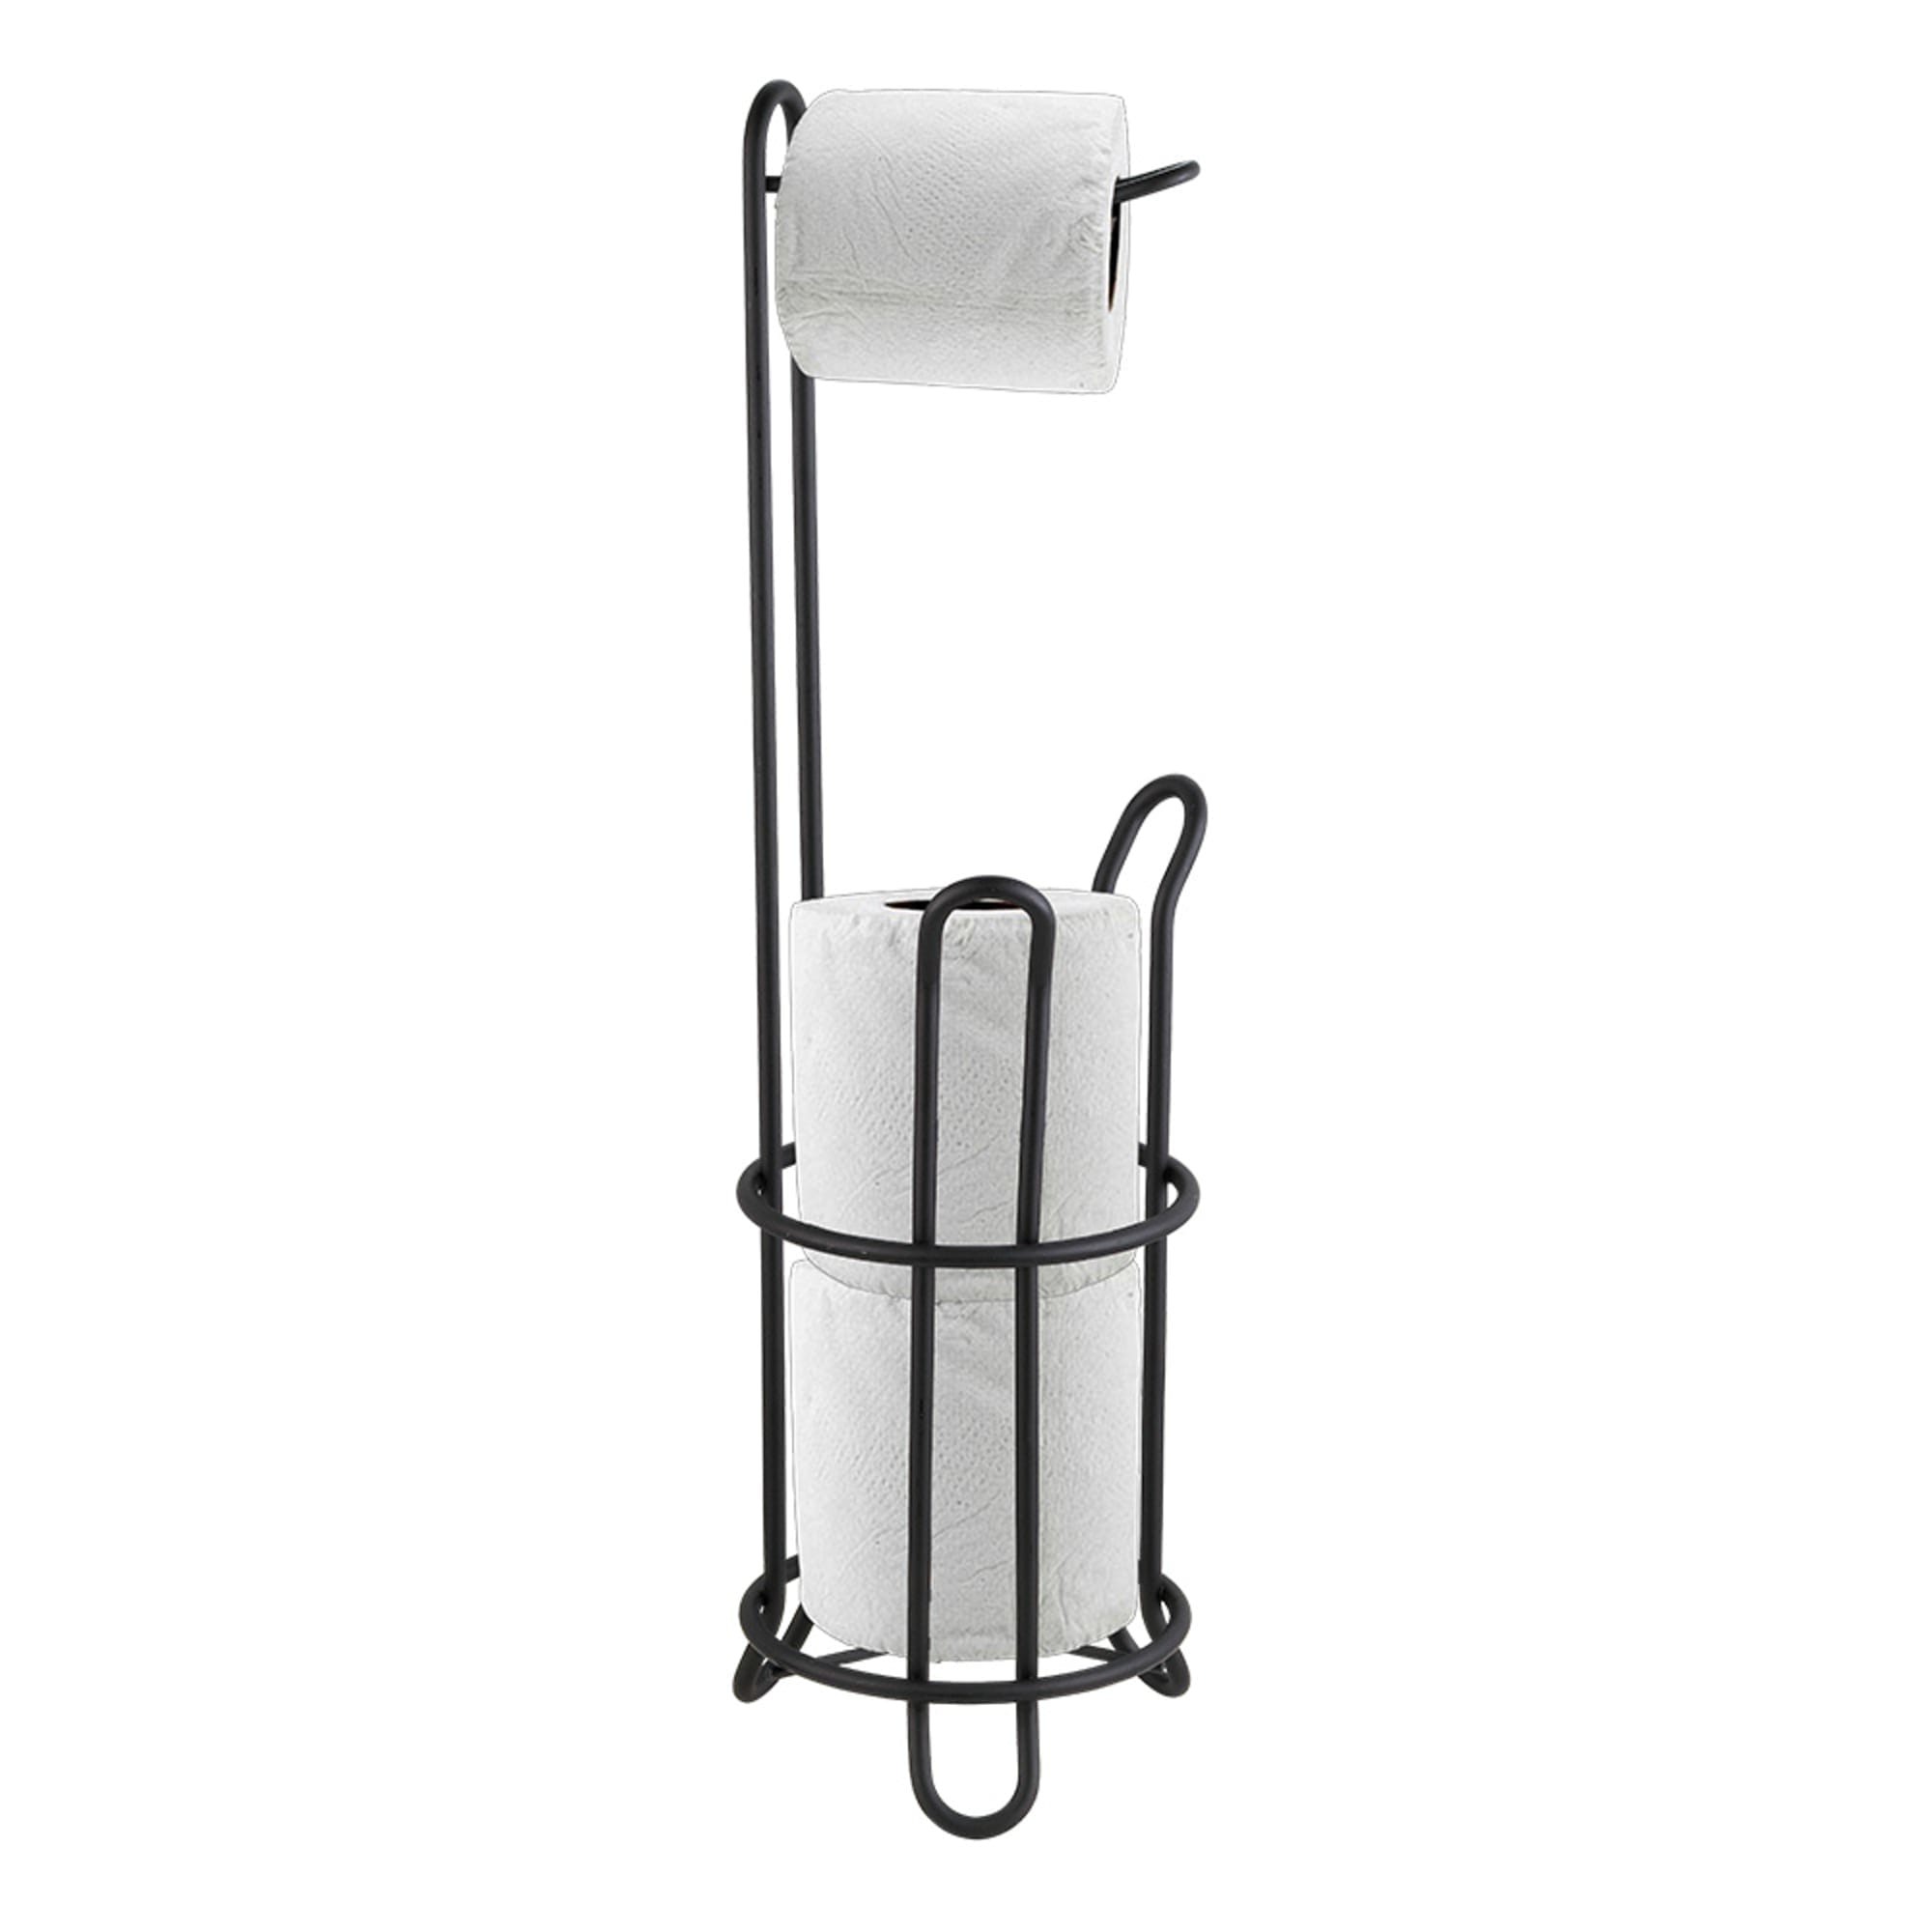 Home Basics Black Metal Heavy Duty Toilet Paper Holder with Dispensing Top $10.00 EACH, CASE PACK OF 6